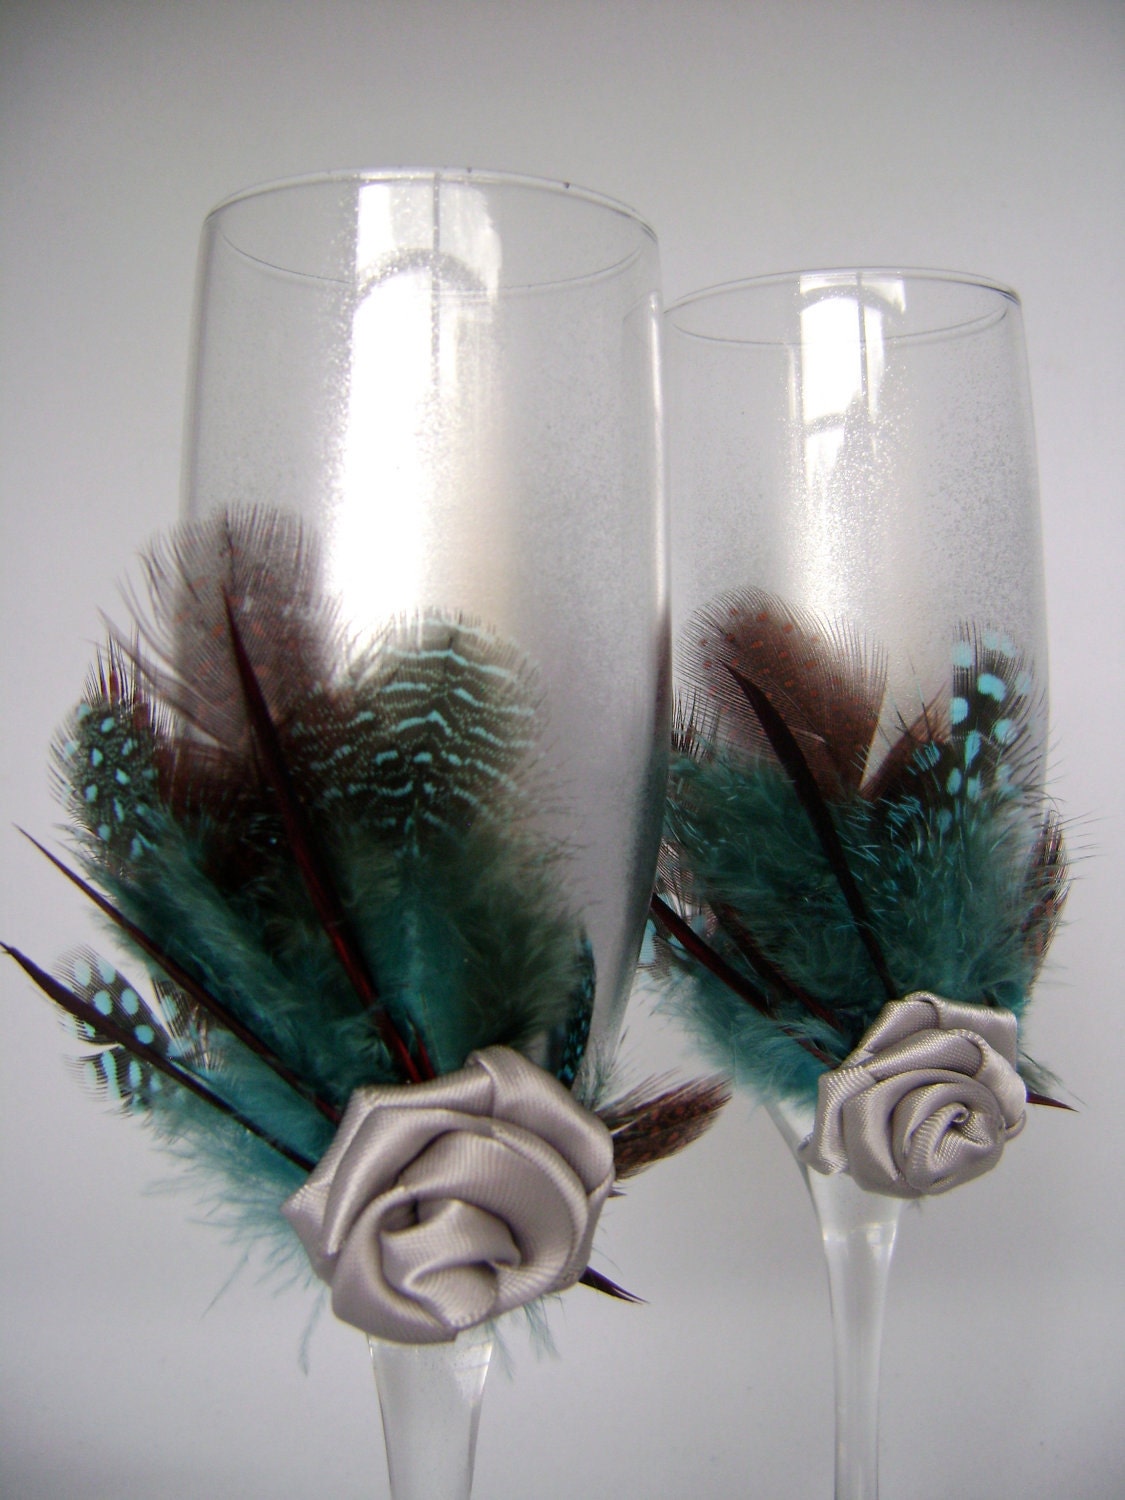 Silver teal wedding champagne glasses hand decorated with feathers and